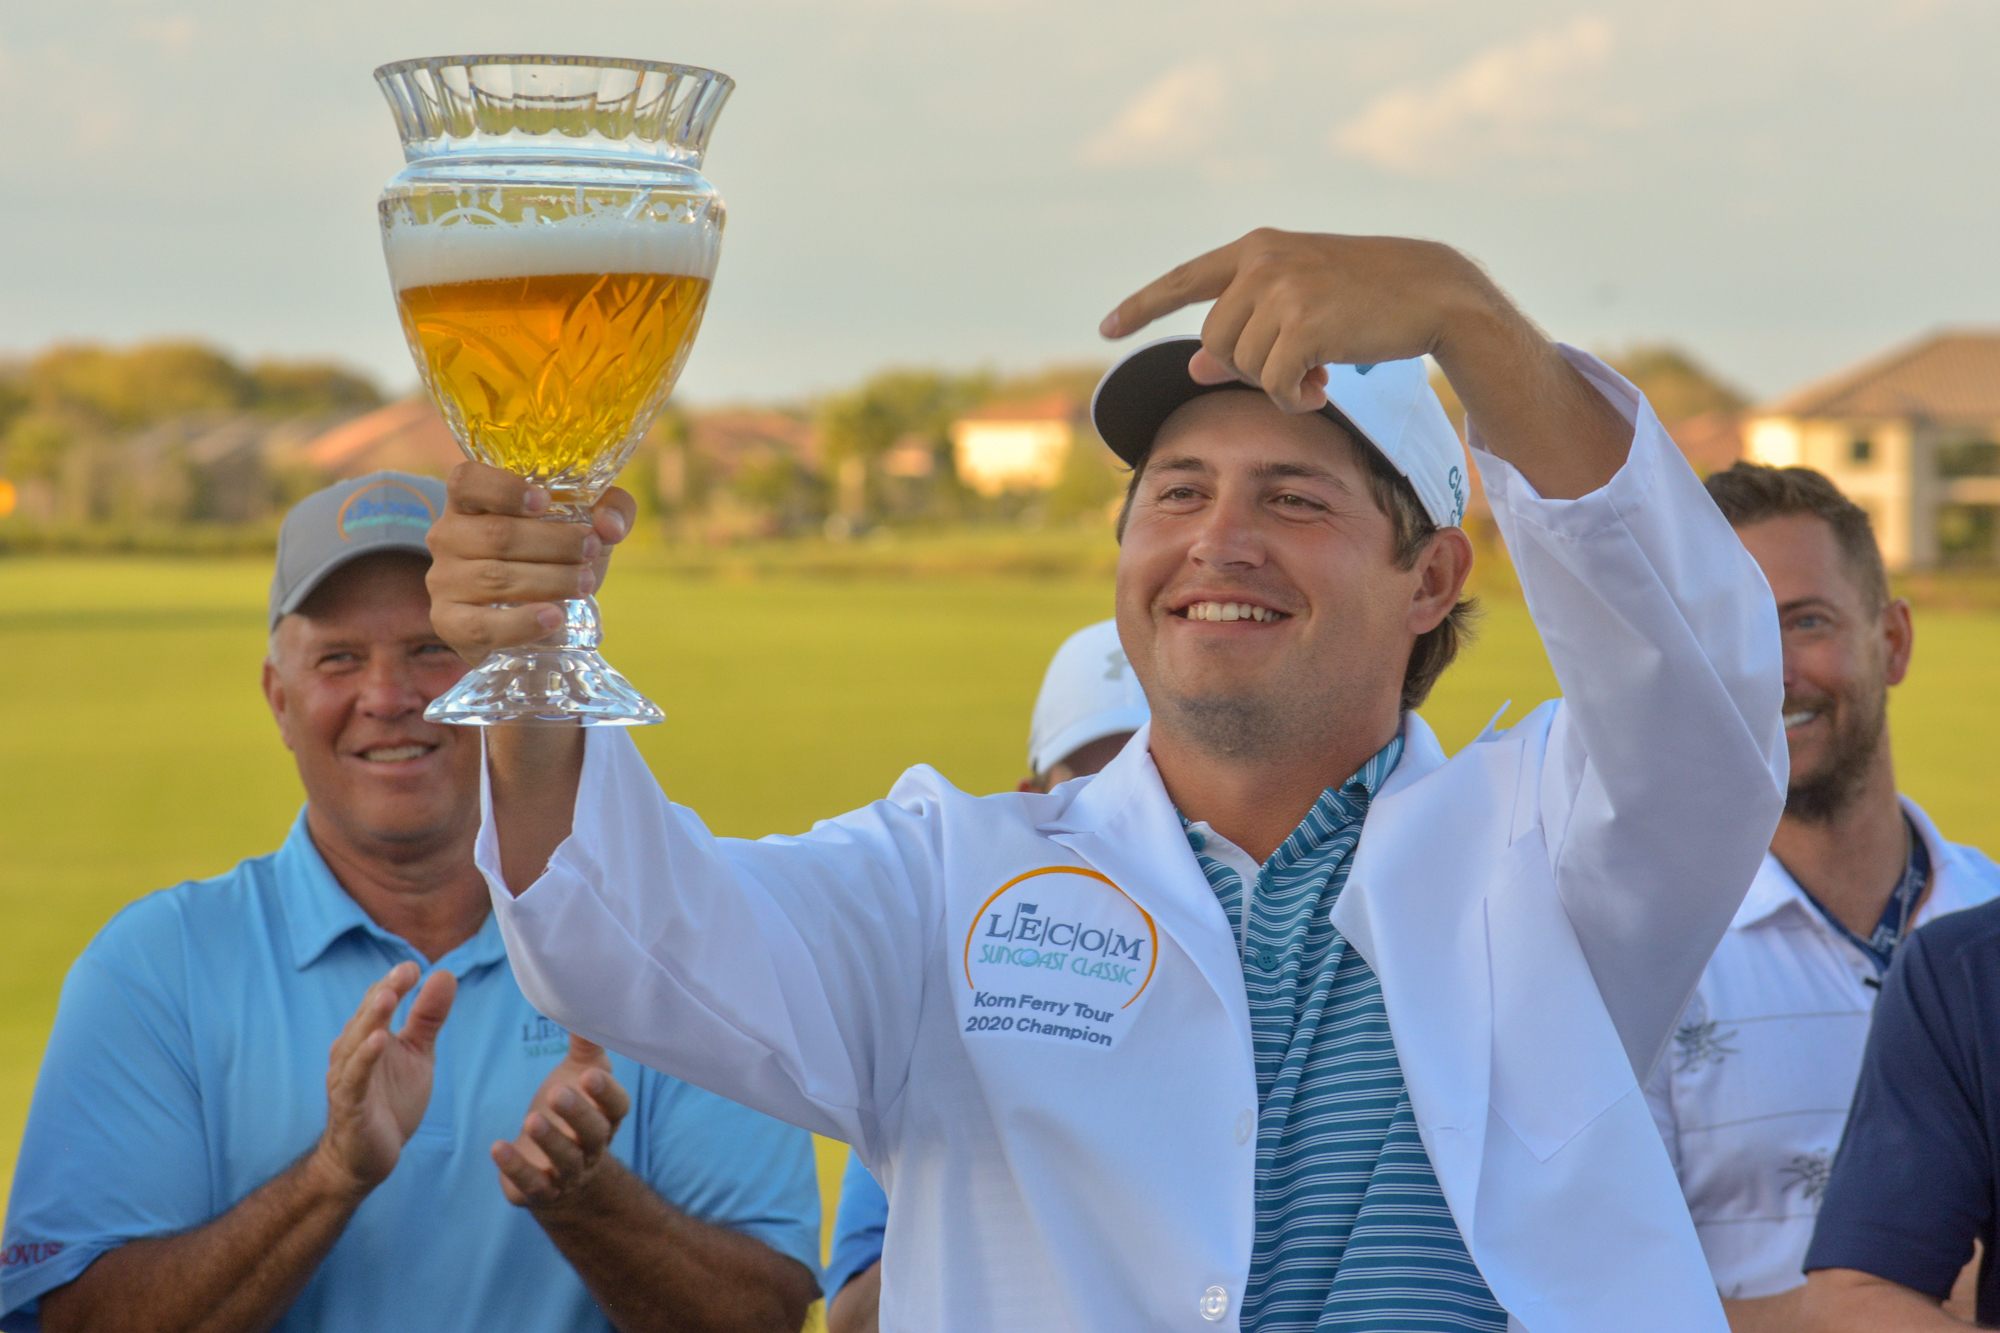 Andrew Novak said the momentum from his Suncoast Classic win was halted by the Korn Ferry Tour's COVID-19 pause.